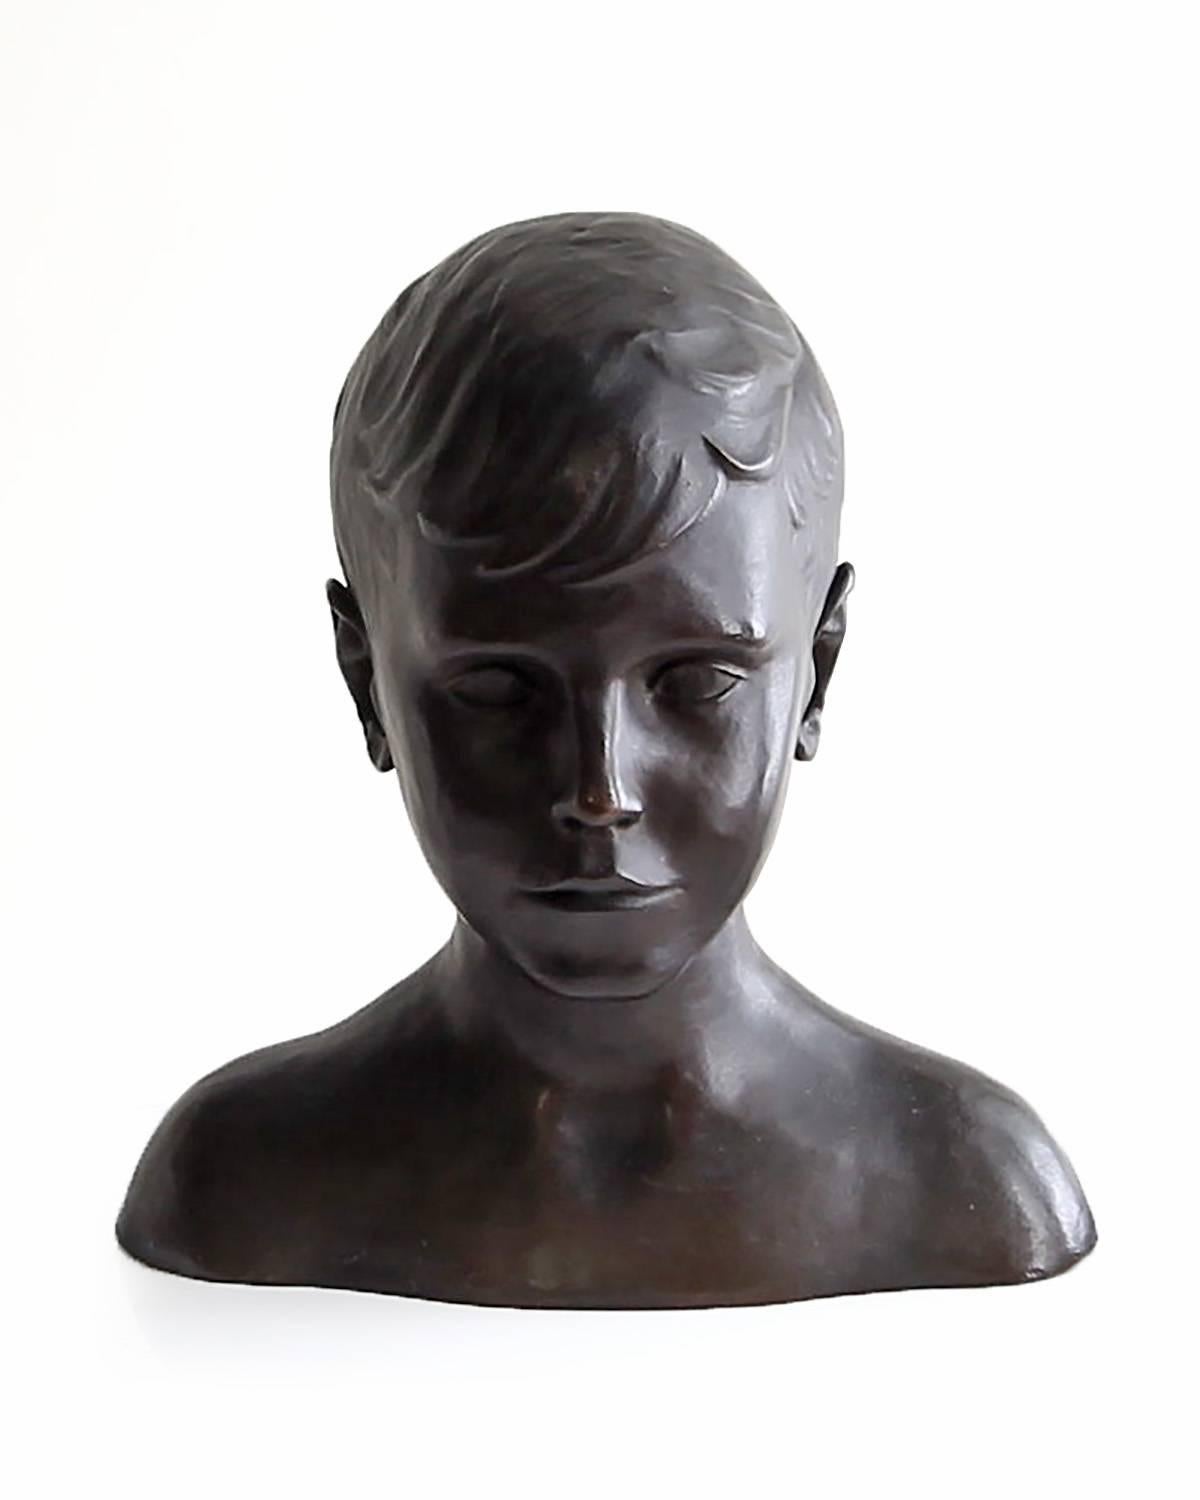 This bronze bust of a handsome young man will bring both beauty and style to your bookshelf or coffee table. The form of the figure celebrates both the youth and innocence of the subject, while allowing the viewer to contemplate and appreciate the